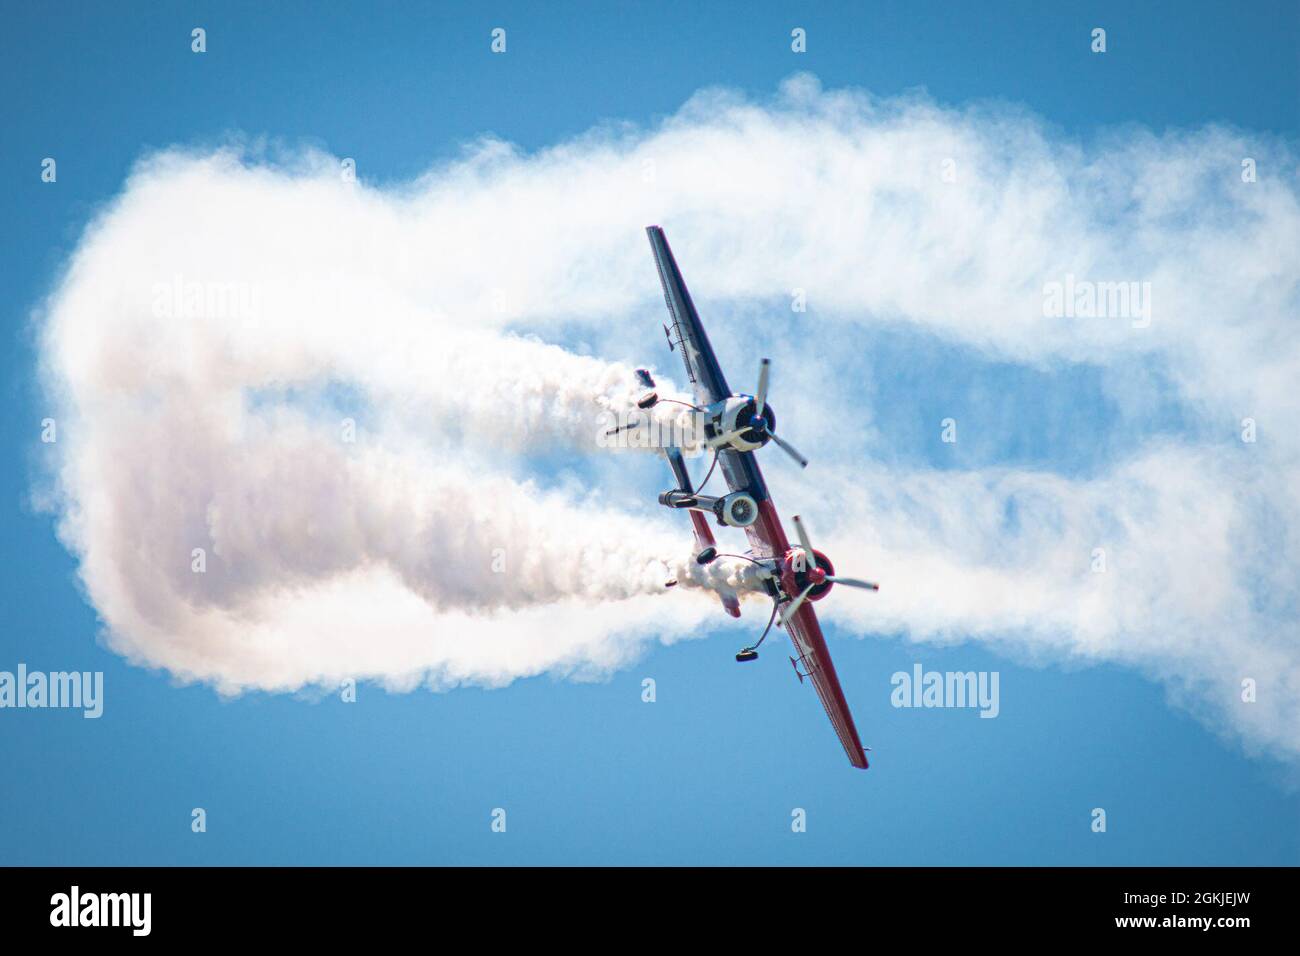 The YAK-110 aircraft piloted by Jeff Boerboon flies above an airstrip during the Speed of Sound Airshow at Rosecrans Memorial Airport in St. Joseph, Missouri, May 1, 2021. The Yak-110 is two Yak-55 aircraft connected together with a J-85 jet engine welded to the bottom. The air show was hosted by the 139th Airlift Wing, and city of St. Joseph to thank the community for their support. The air show committee estimated around 30,000 people attended during the weekend performances in which the United States Air Force Thunderbirds Air Demonstration Squadron were featured. Stock Photo